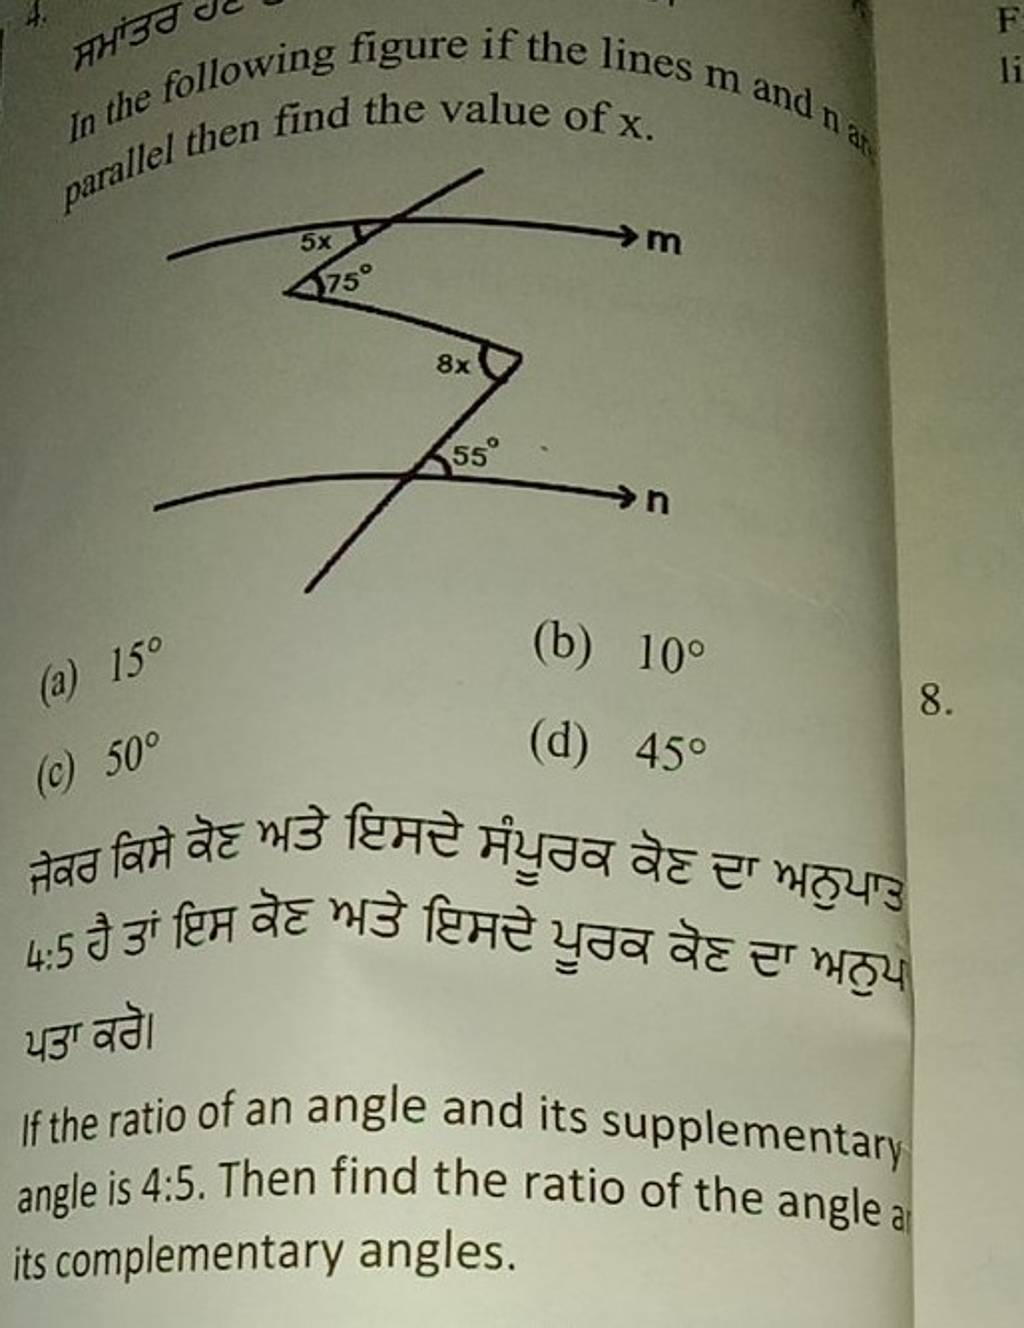 In the following figure if the lines m and pn​ ard allel then find the